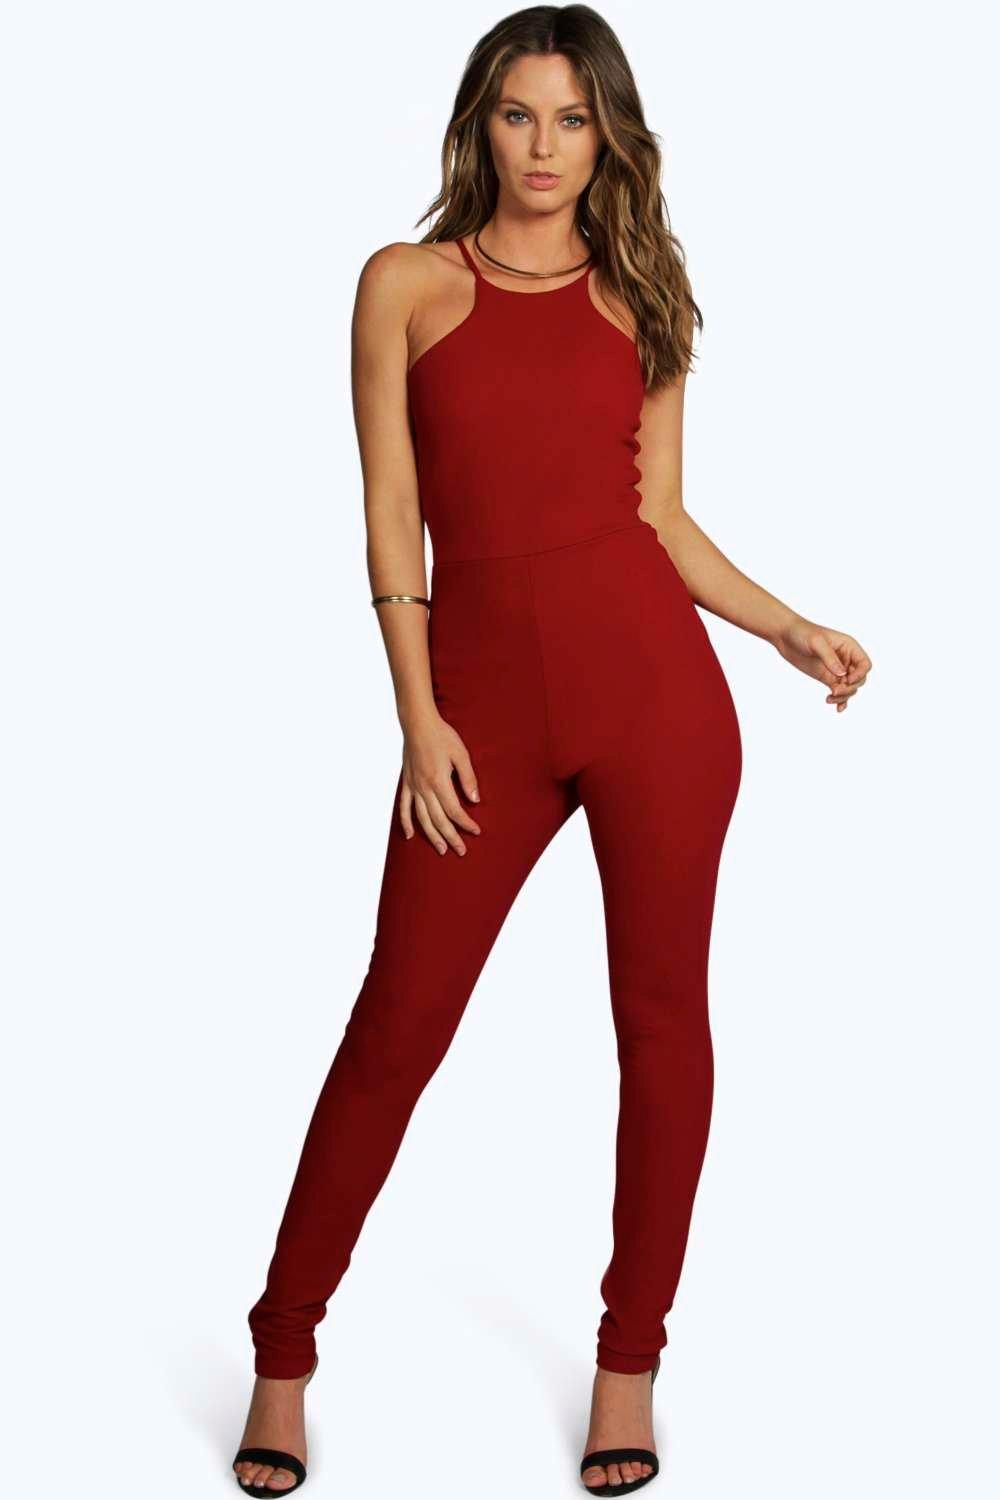 Taylor Textured Crepe Strappy Jumpsuit at boohoo.com